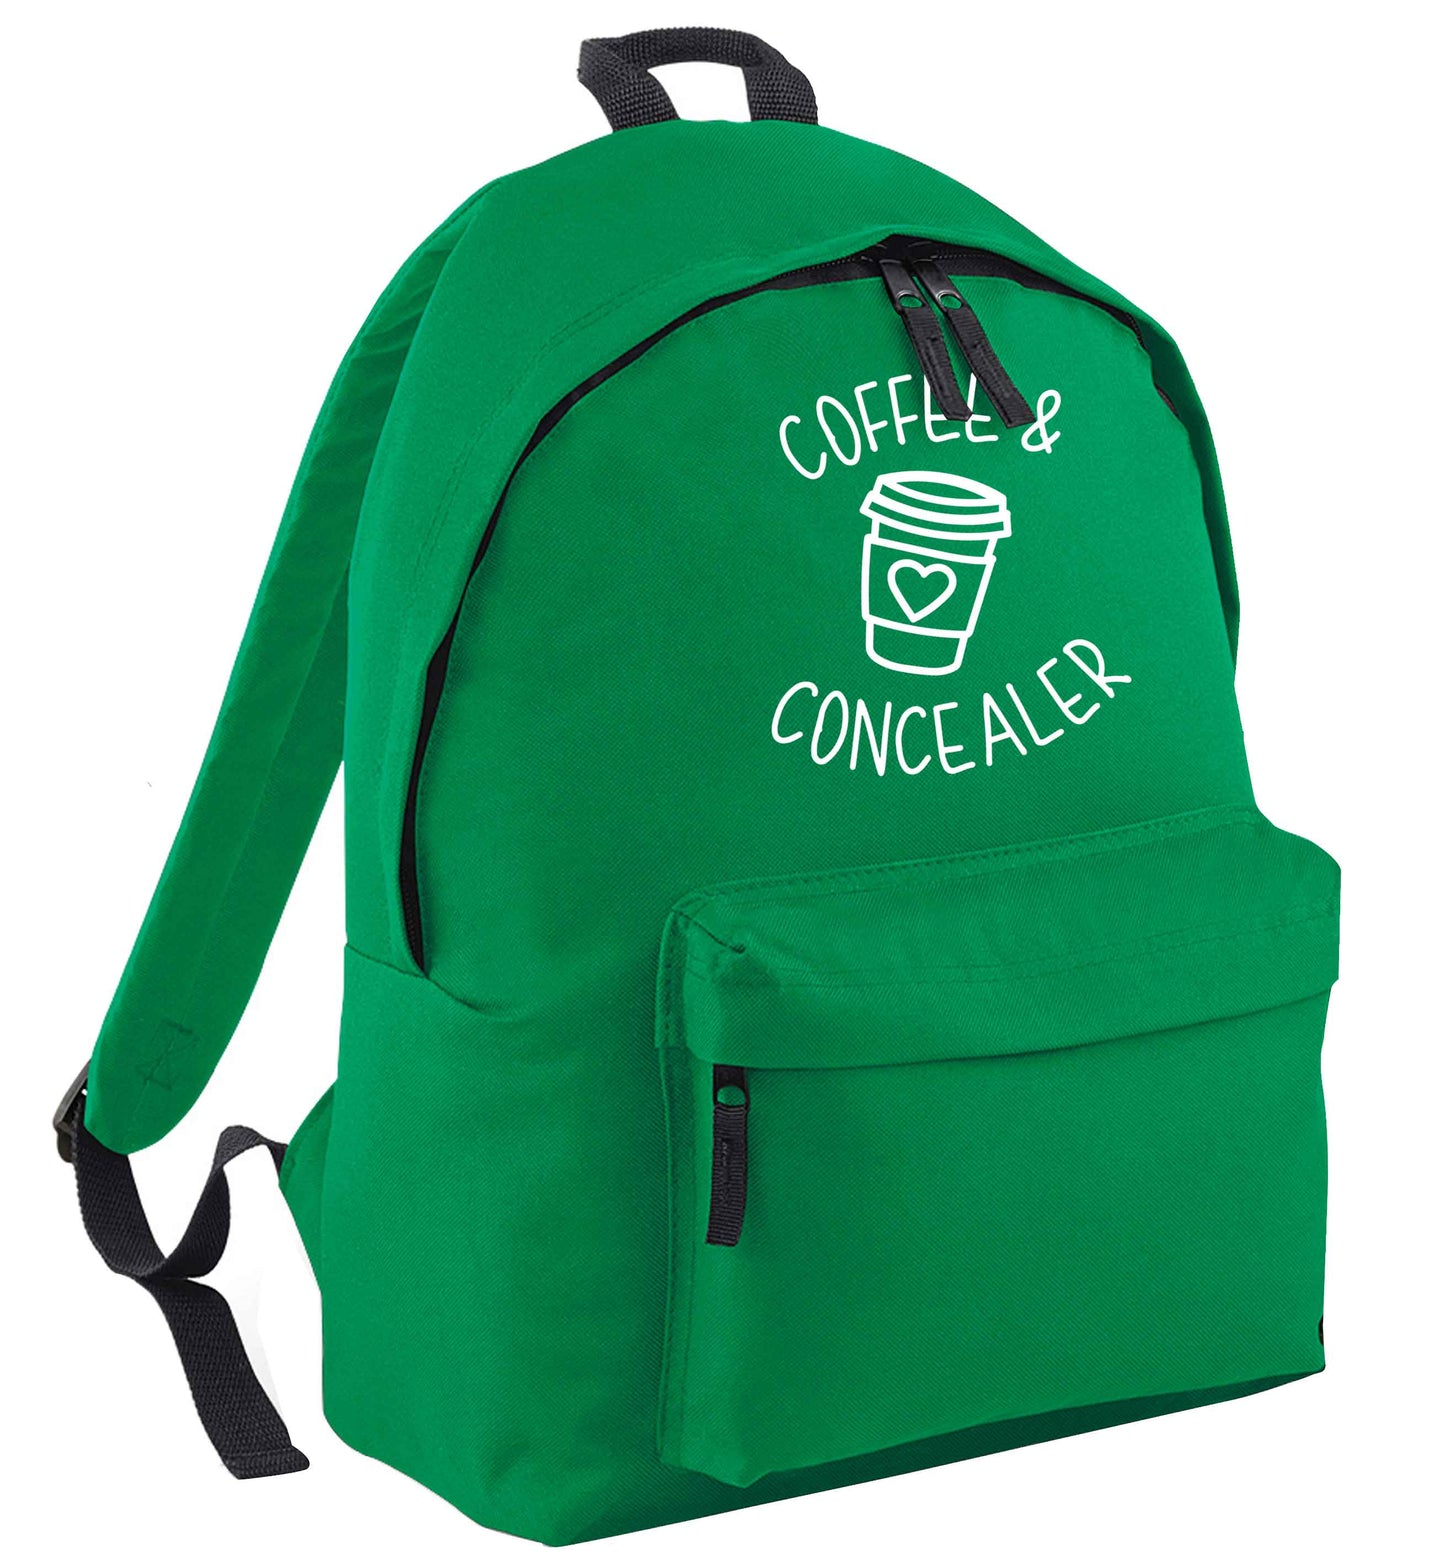 Coffee and concealer green adults backpack